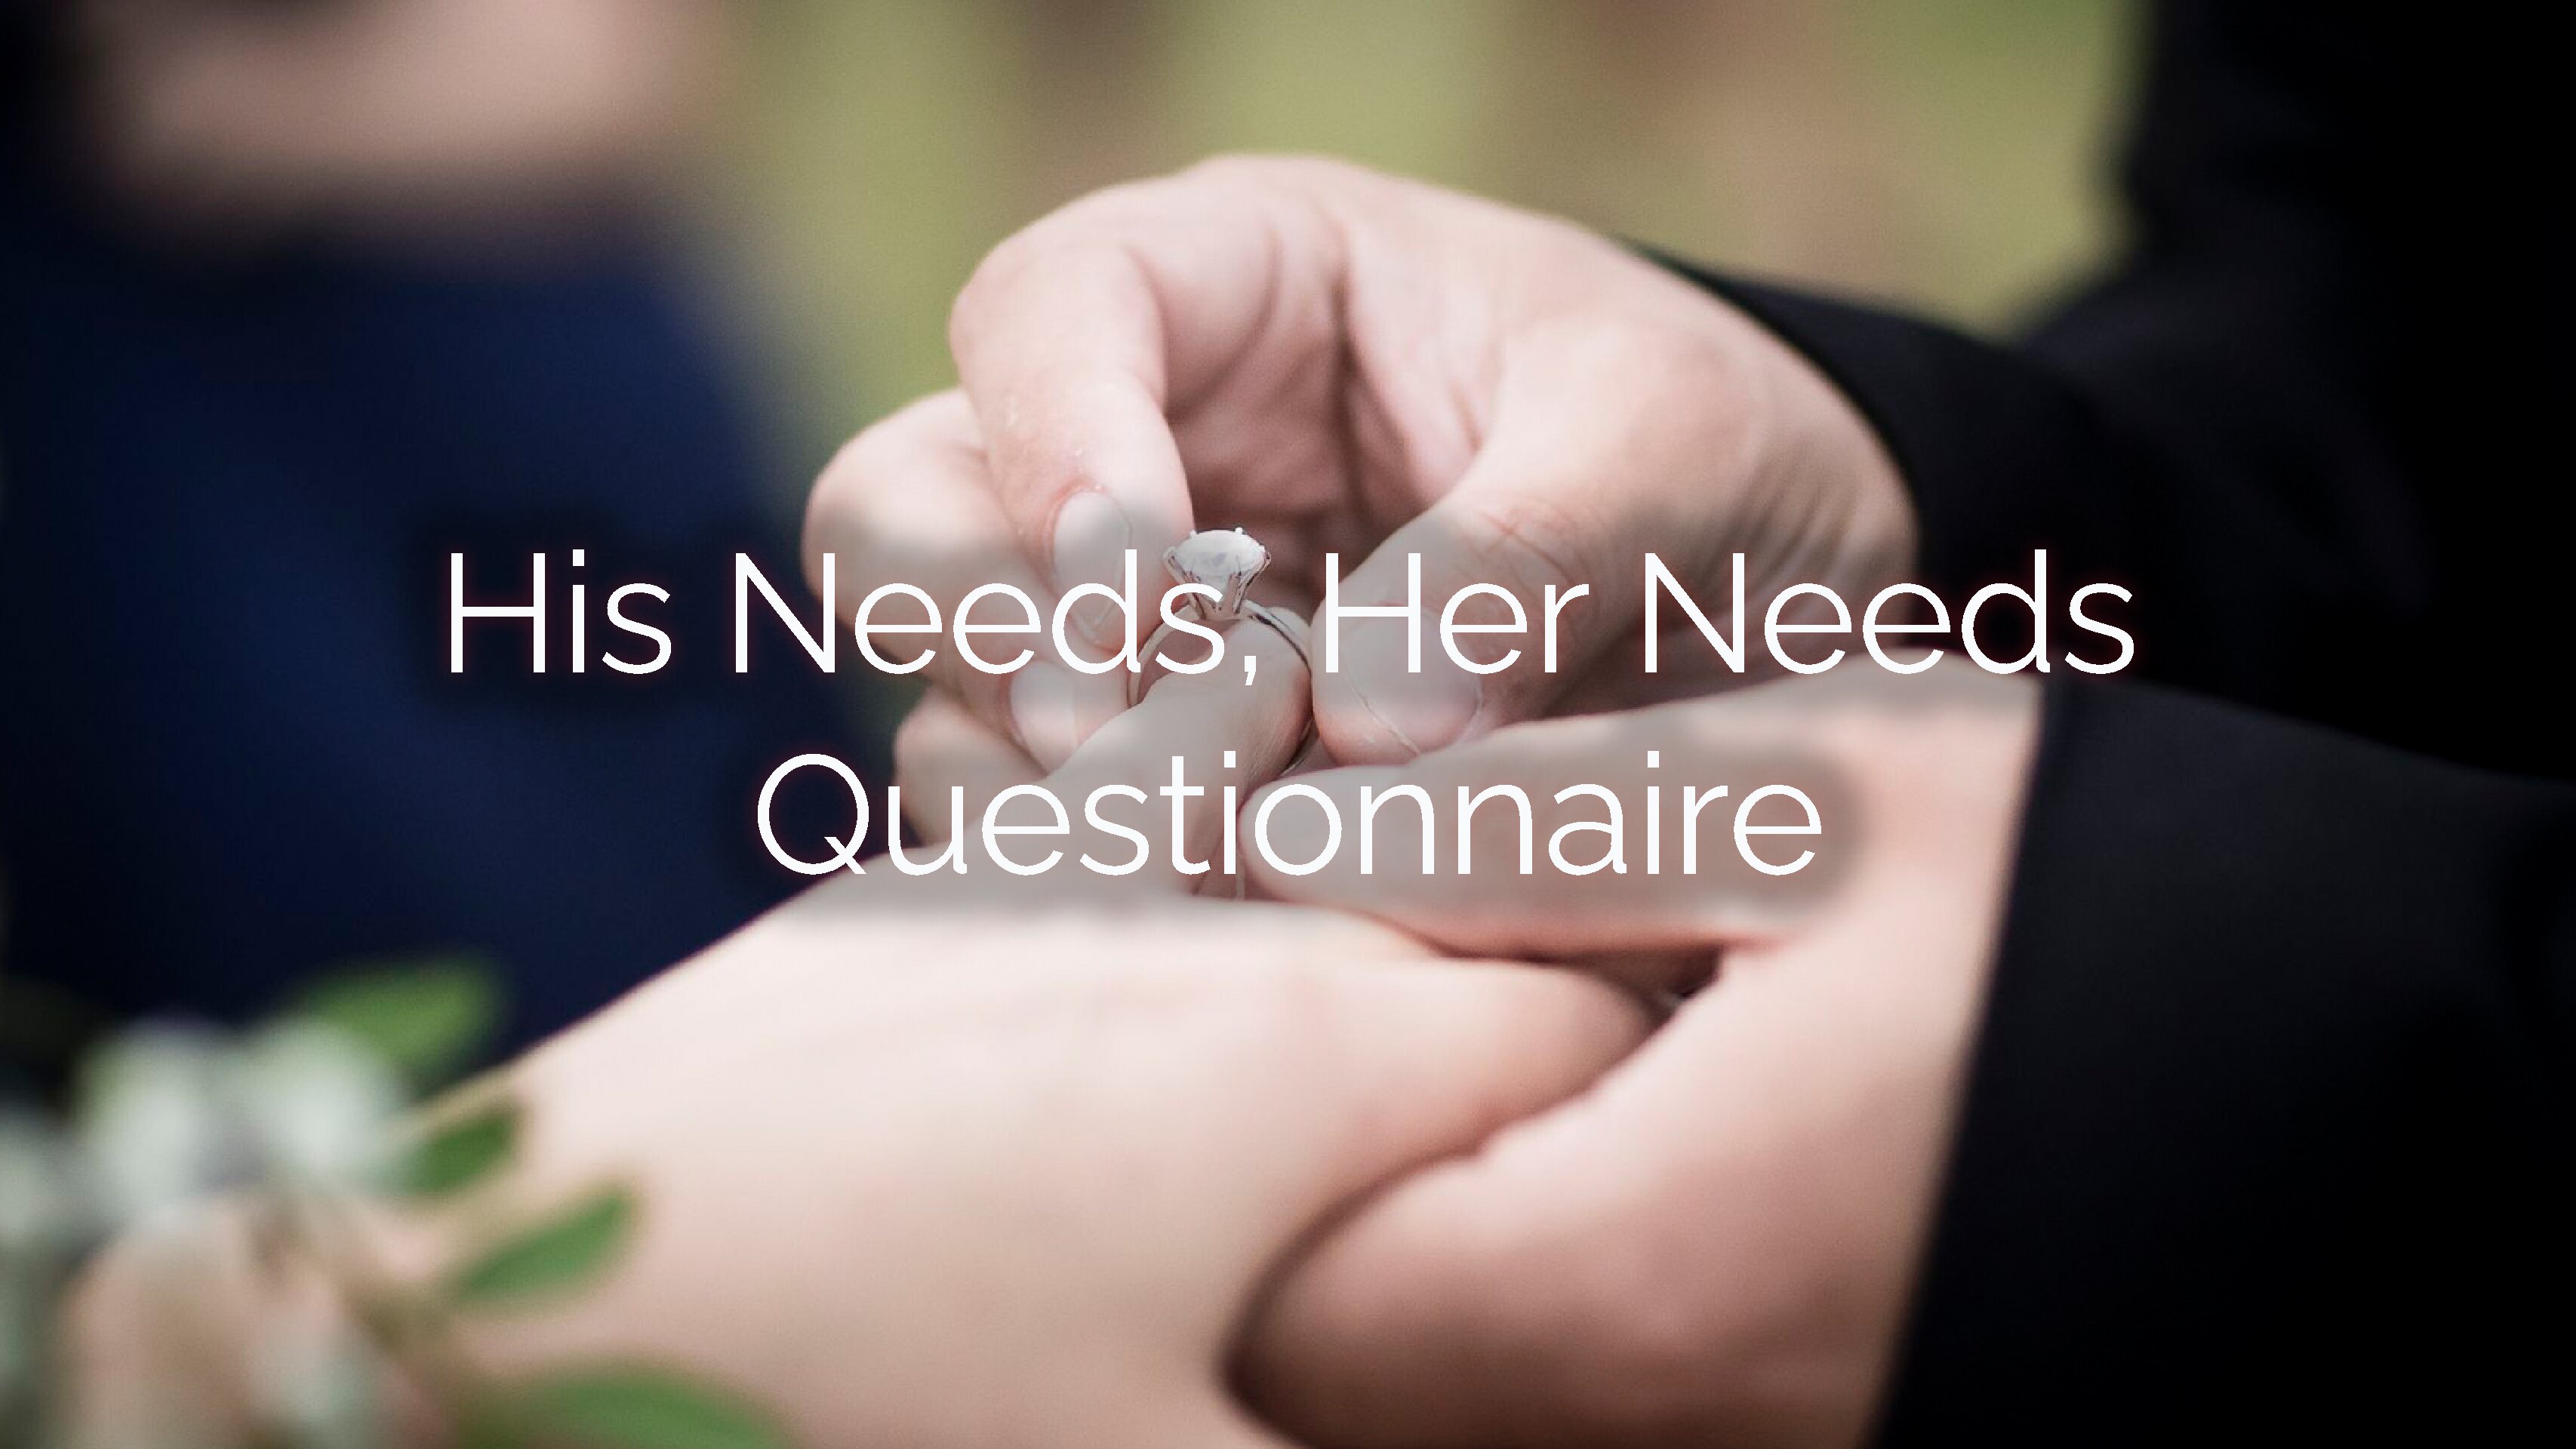 His Needs, Her Needs Questionnaire